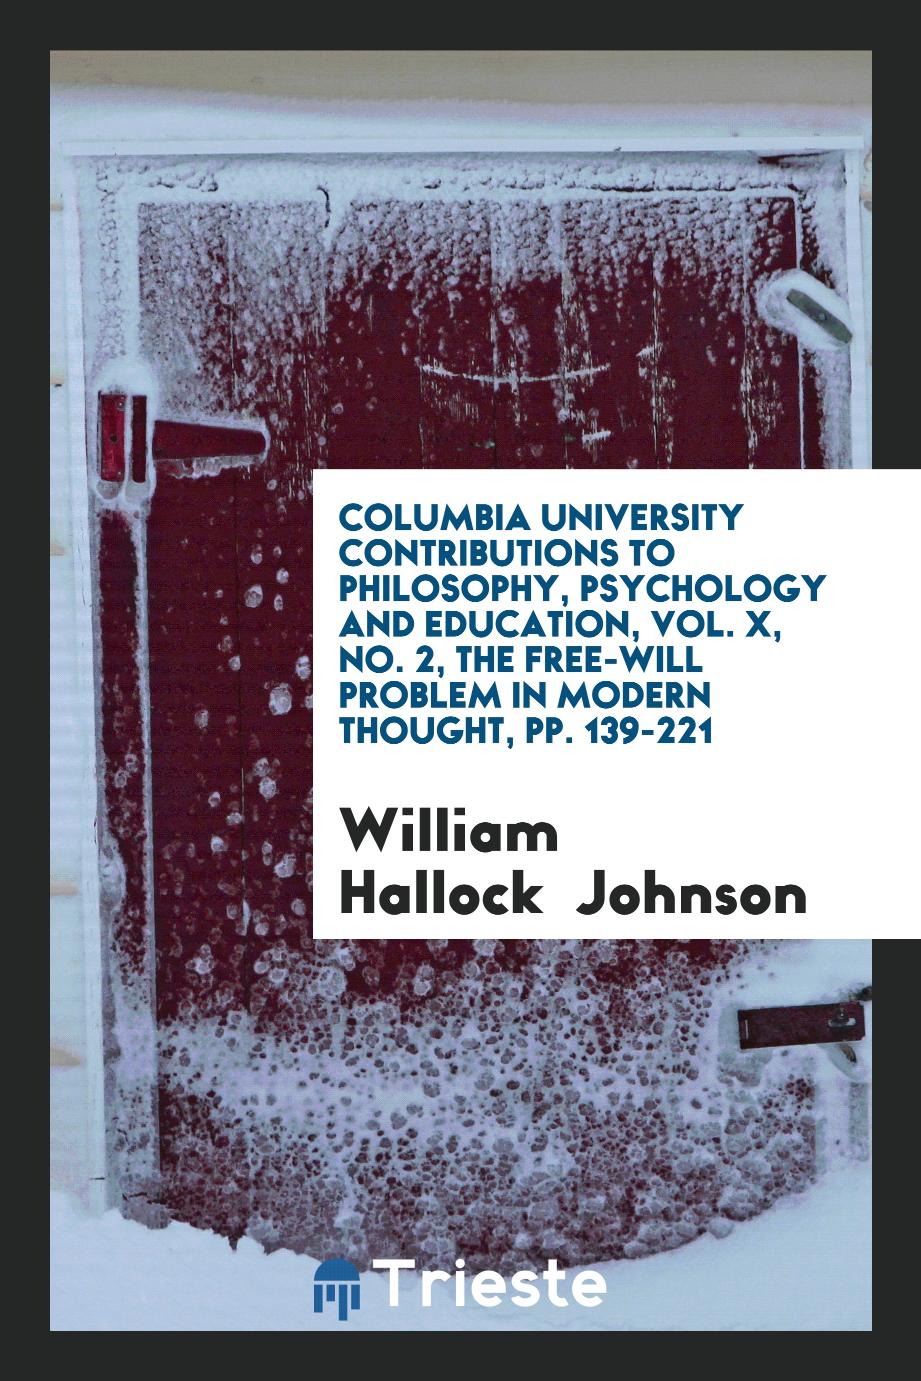 Columbia University Contributions to Philosophy, Psychology and Education, Vol. X, No. 2, The Free-will Problem in Modern Thought, pp. 139-221